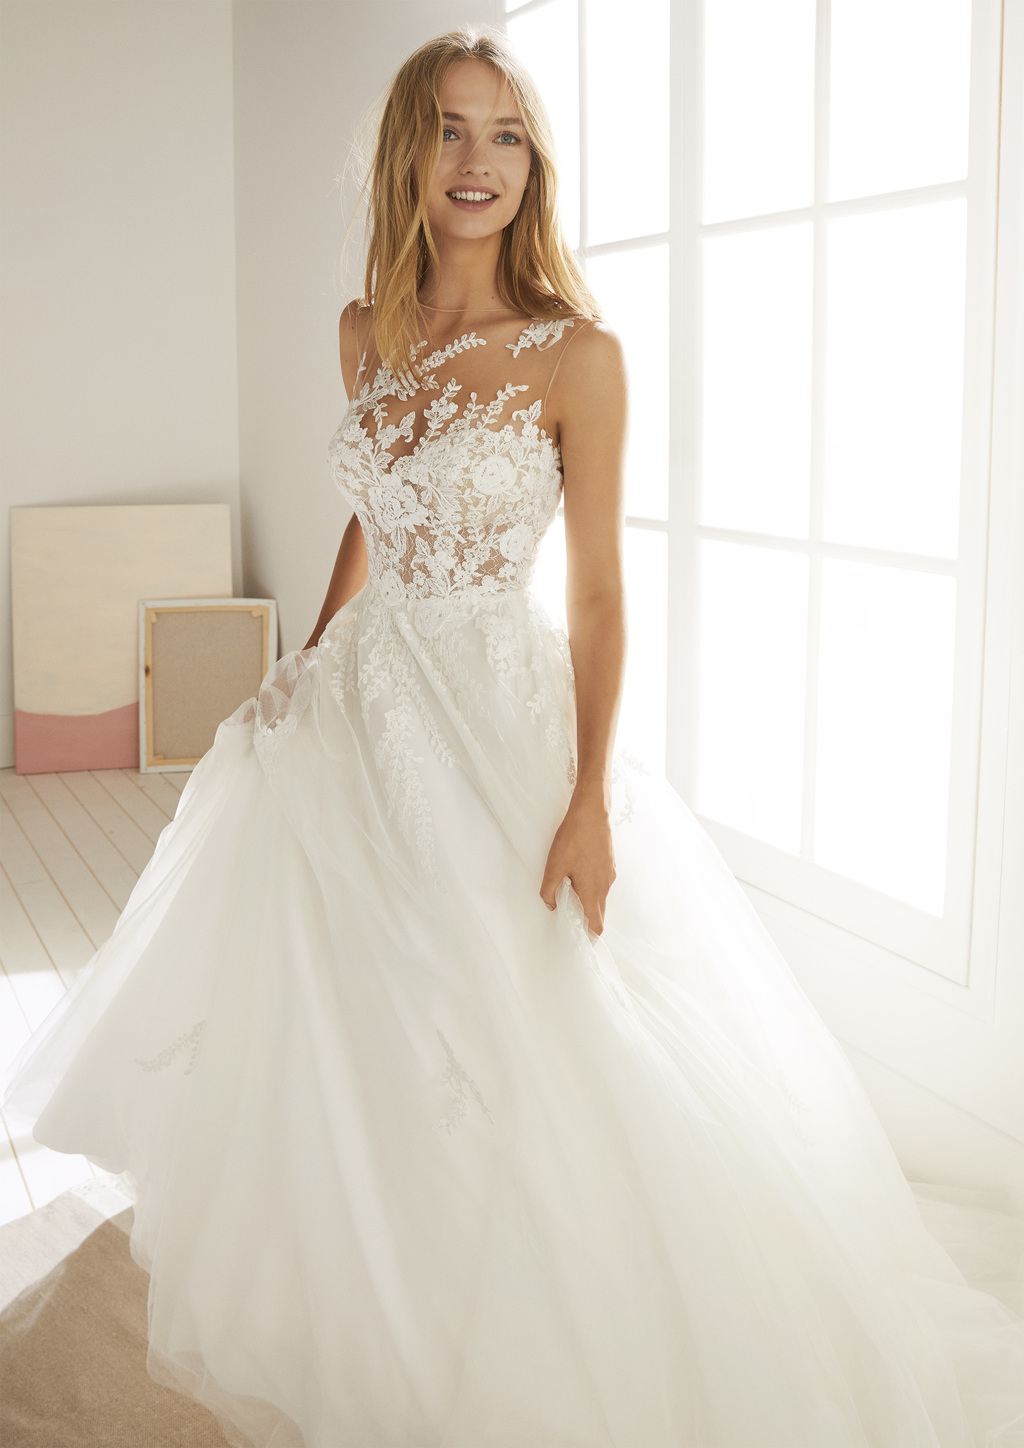 illusion bodice wedding dress with floral appliques and flirty skirt